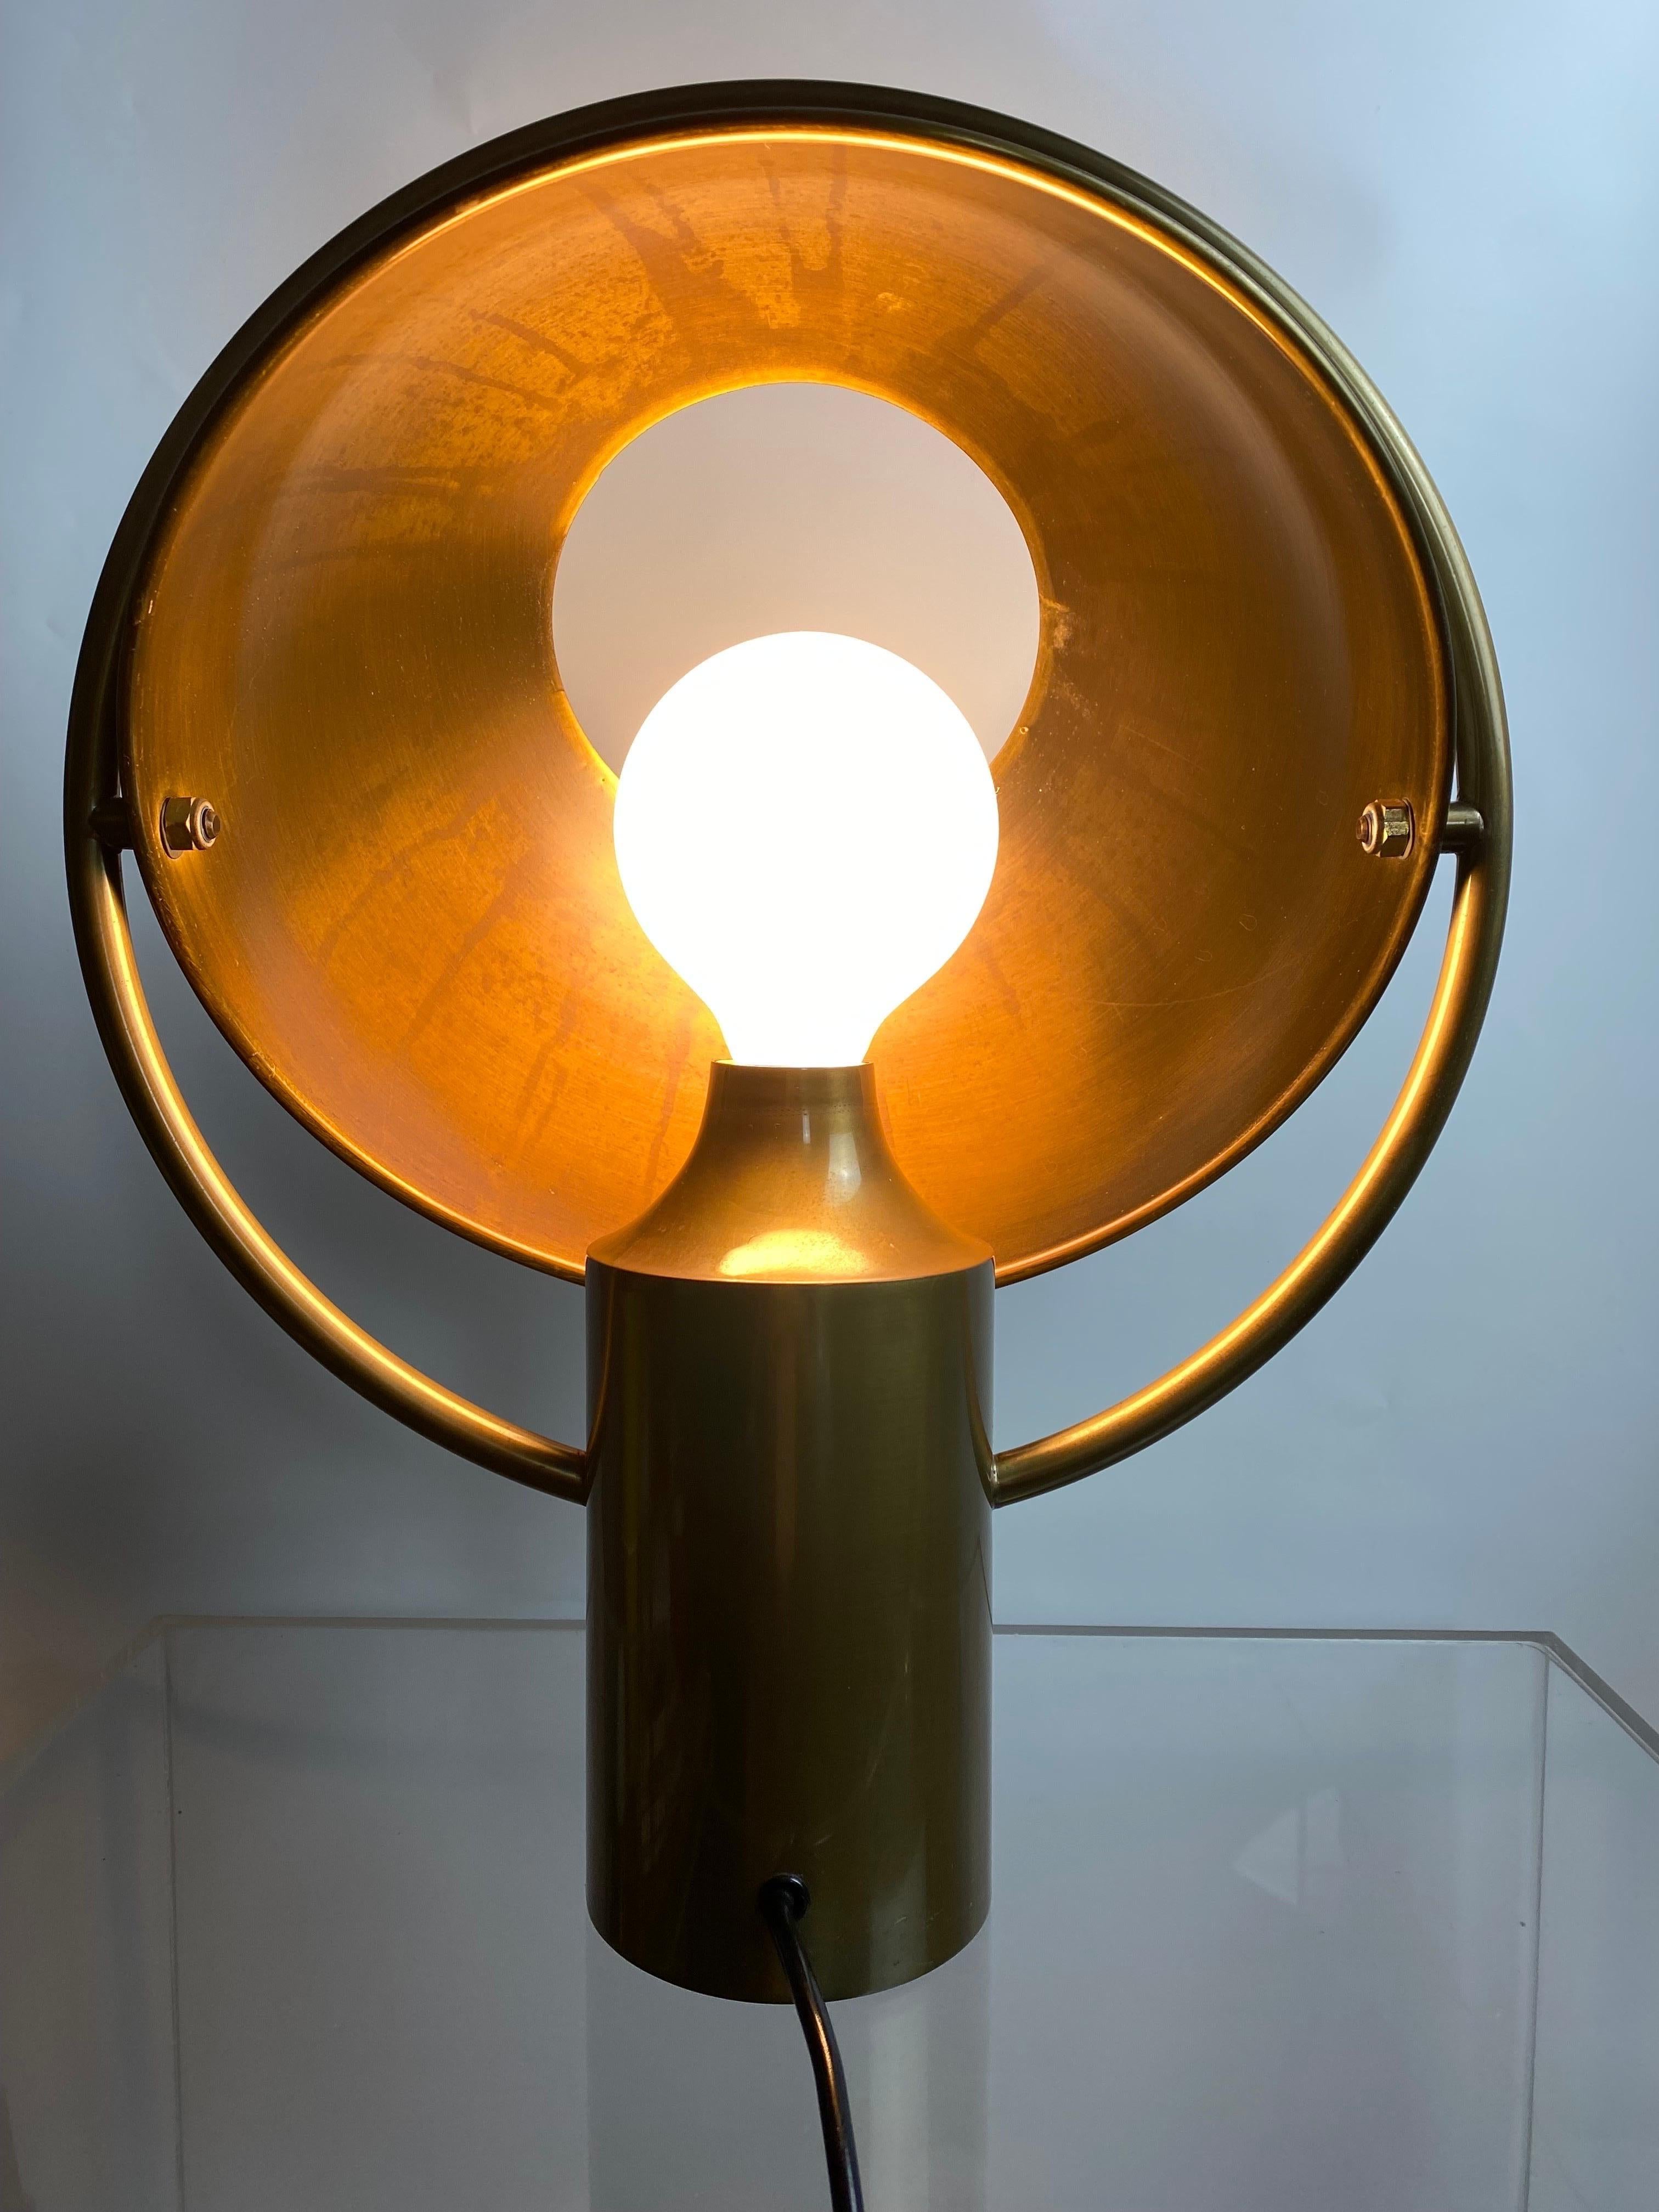 Rare German Midcentury Table Lamp in Solid Brass by Günter&Florian Schulz 1970s For Sale 5